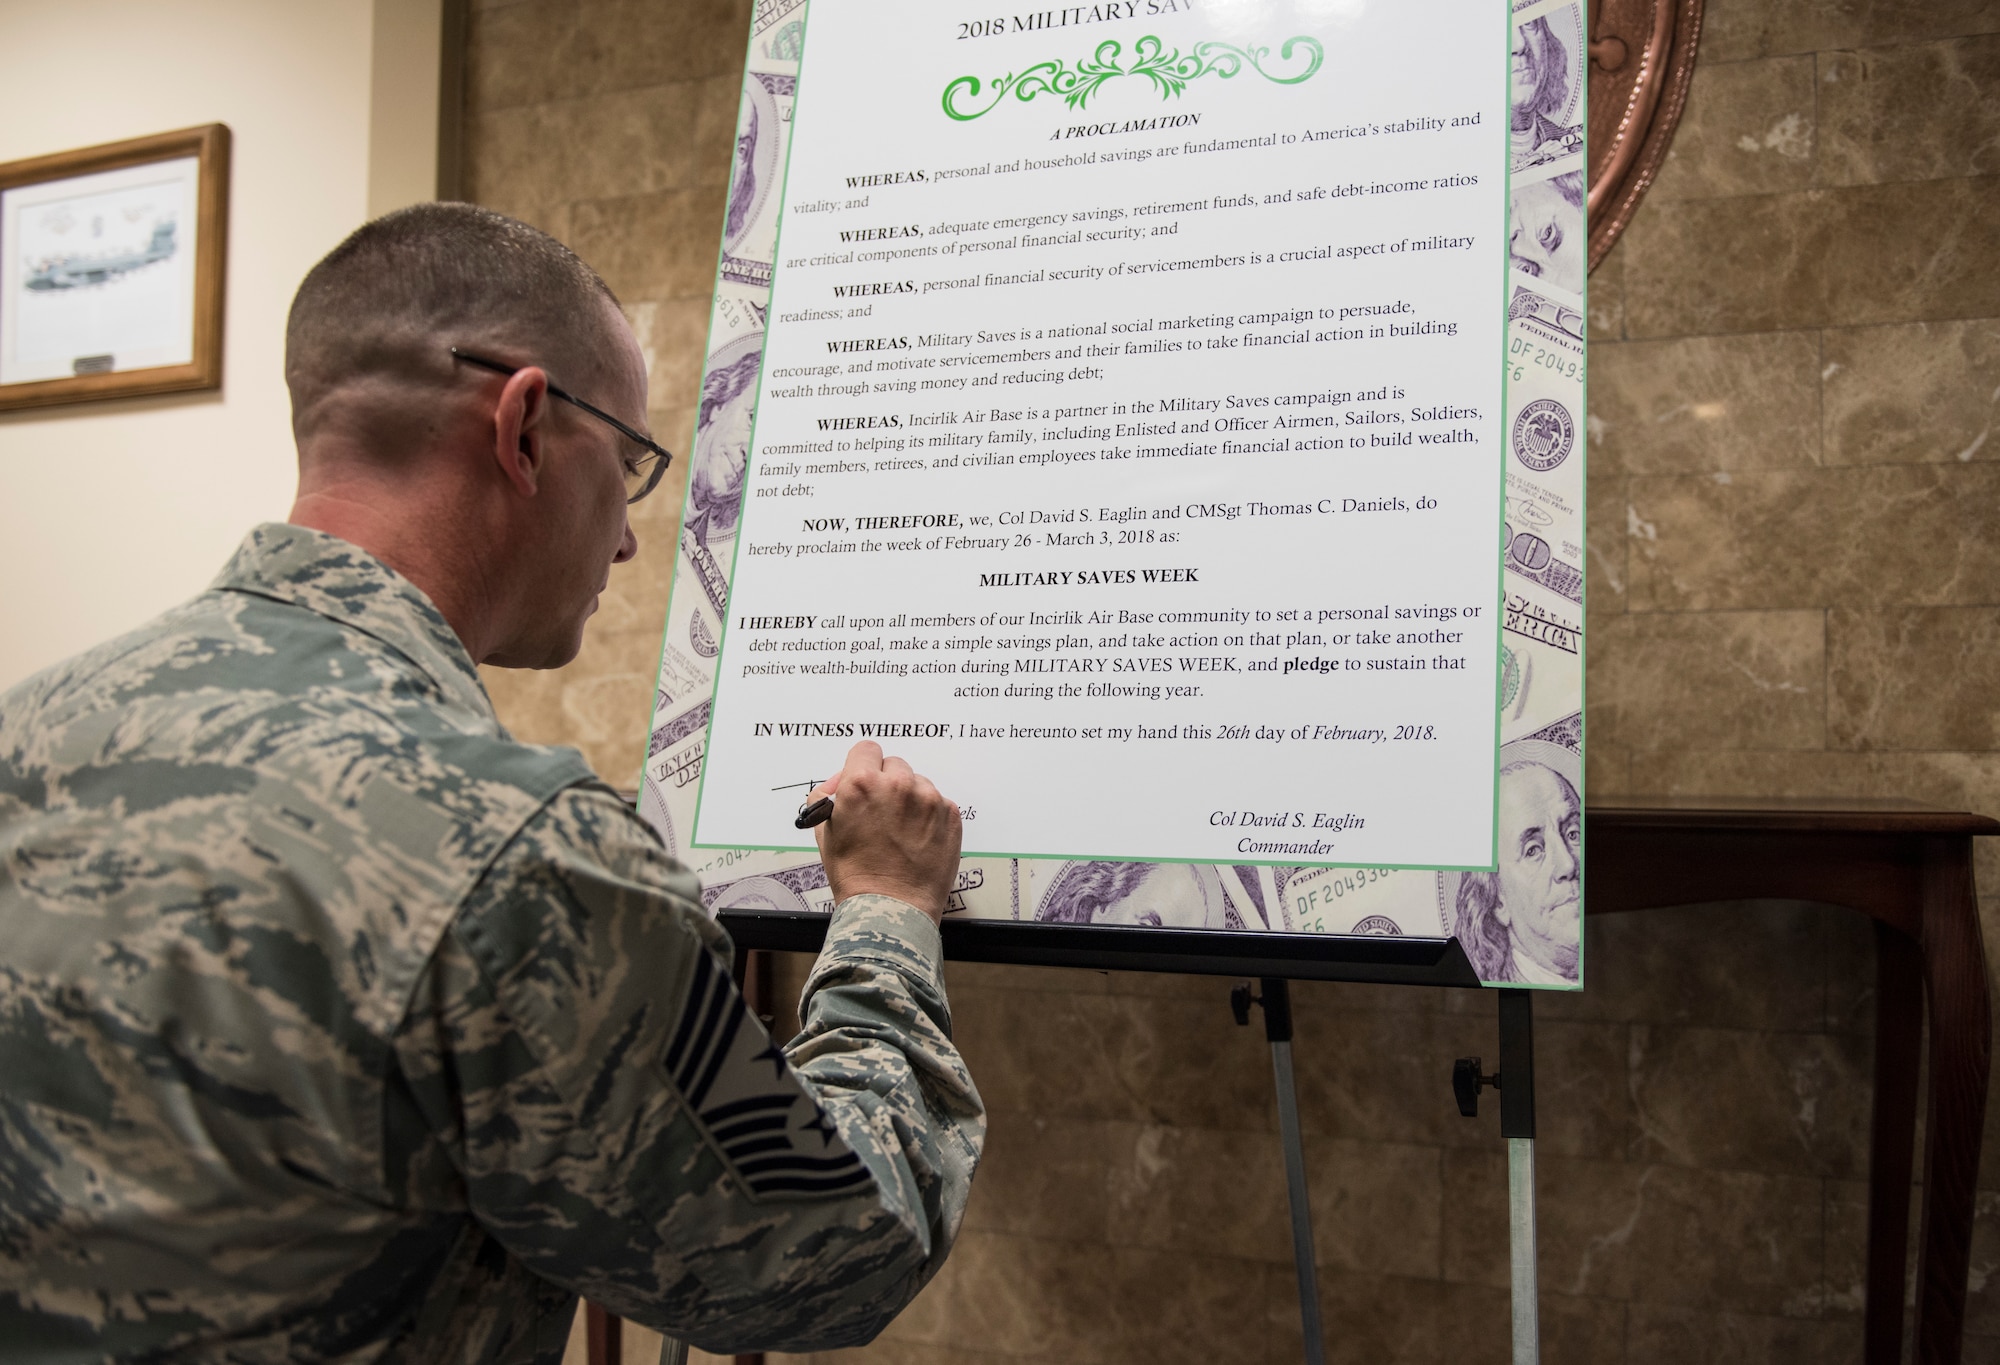 U.S. Air Force Chief Master Sgt. Thomas Daniels, 39th Air Base Wing command chief, signs the Military Saves Week proclamation